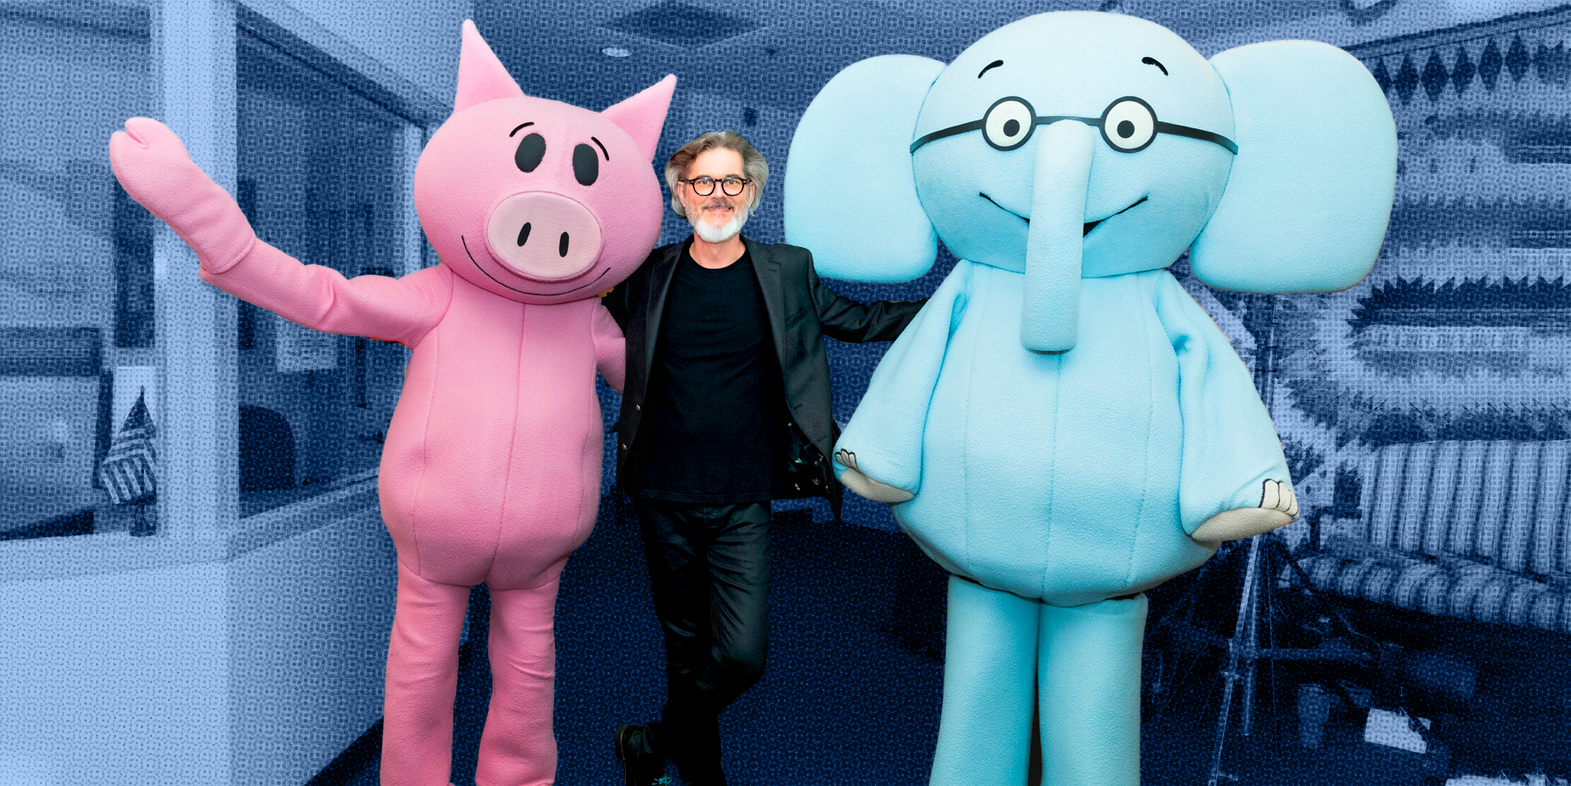 https://hips.hearstapps.com/hmg-prod/images/mo-willems-1600295061.png